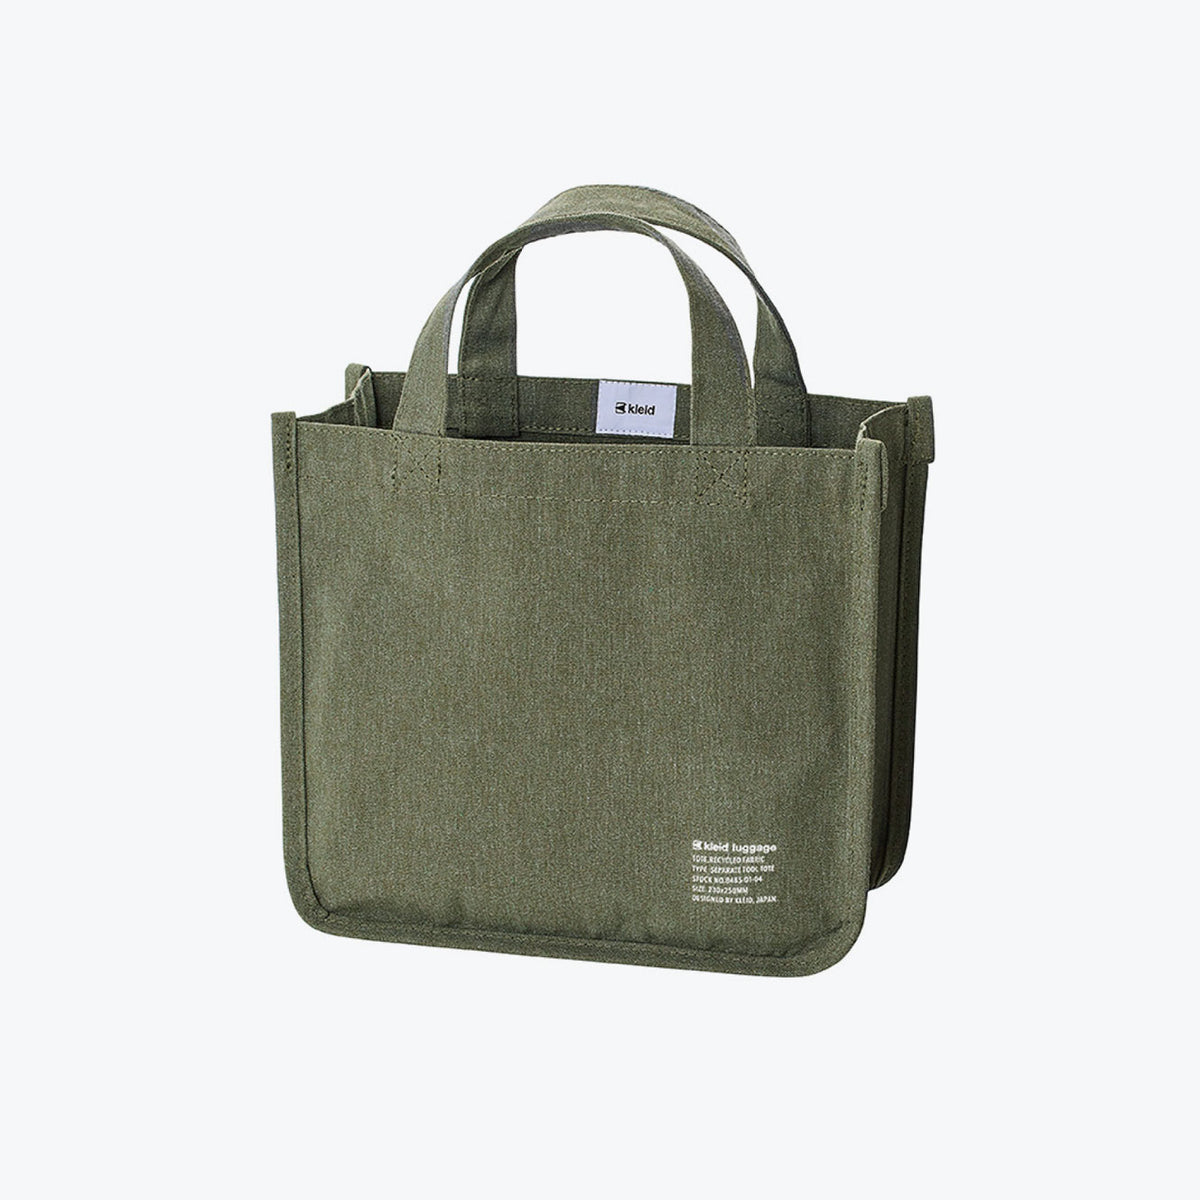 Kleid - Carry Case - Seperate Tool Tote - Olive Drab